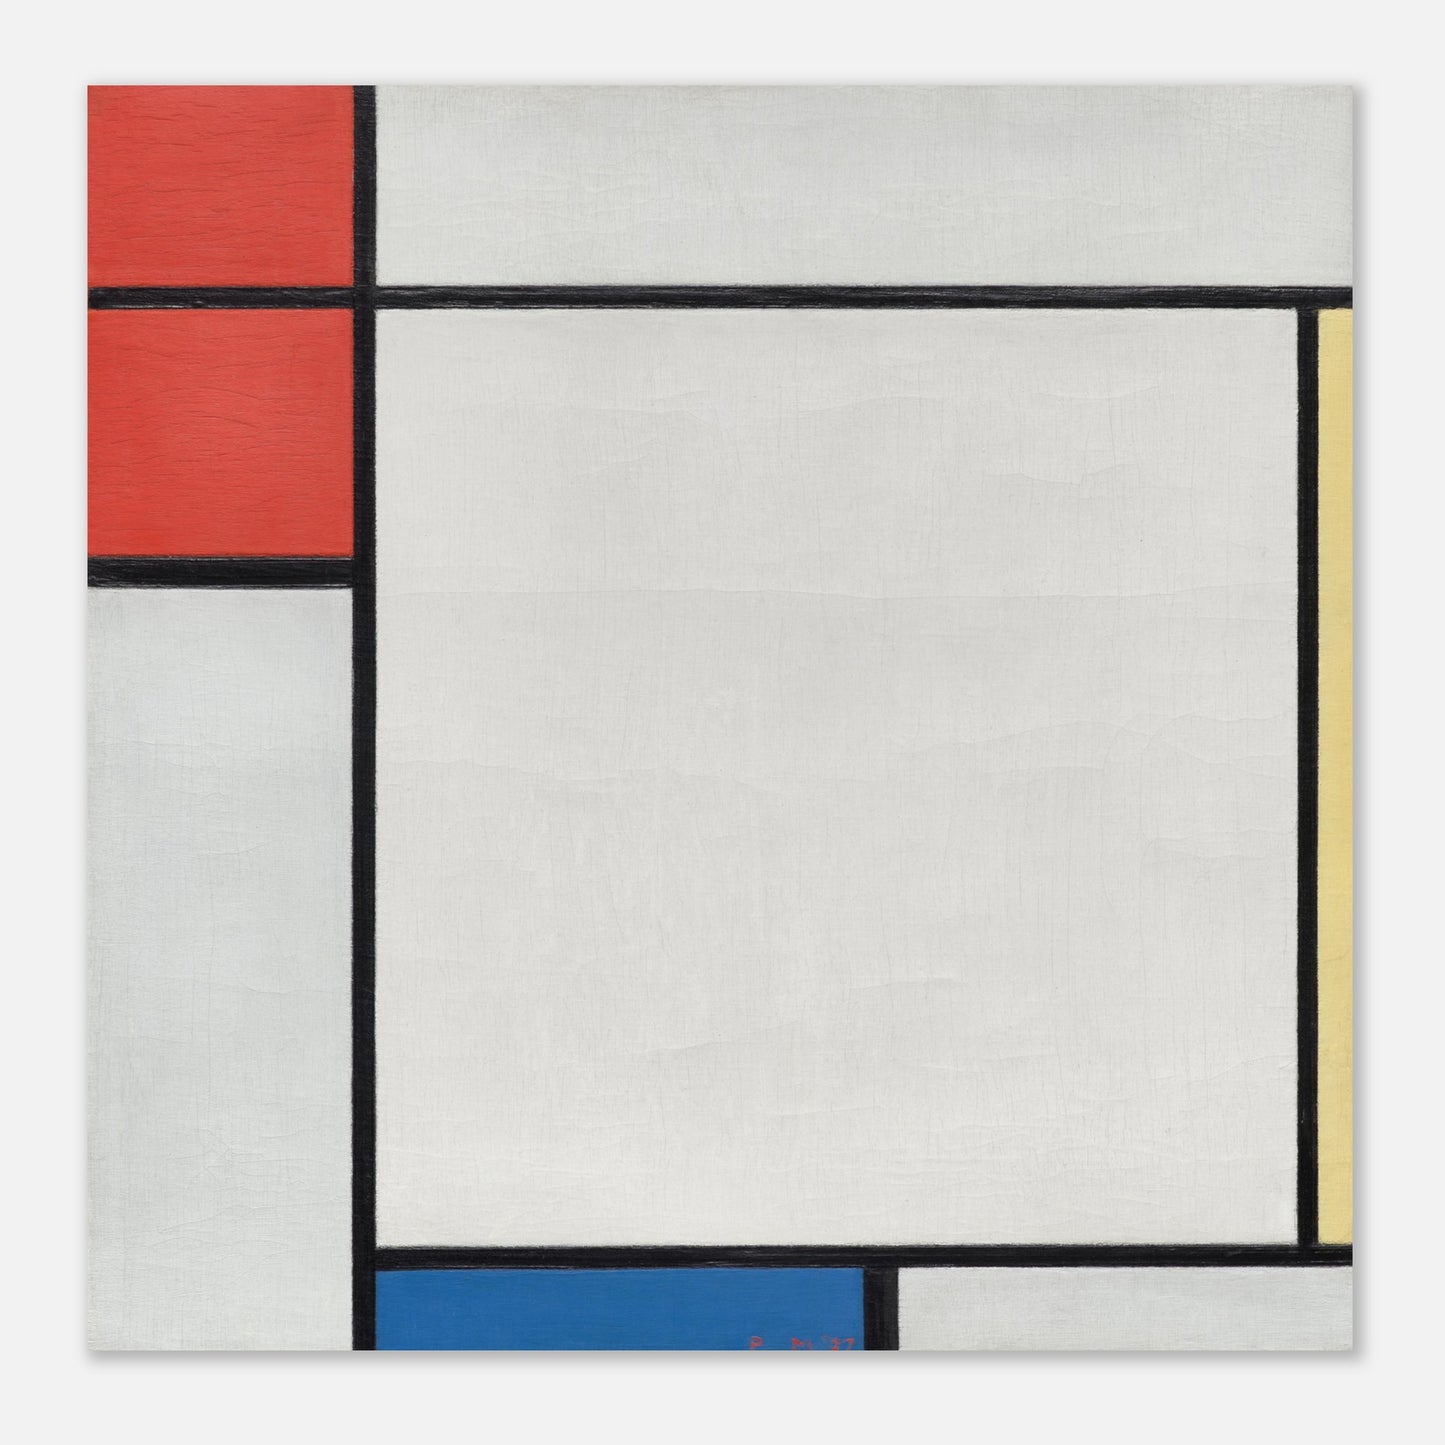 PIET MONDRIAN - COMPOSITION WITH RED, YELLOW, AND BLUE (1927) - ALUMINUM PRINT 